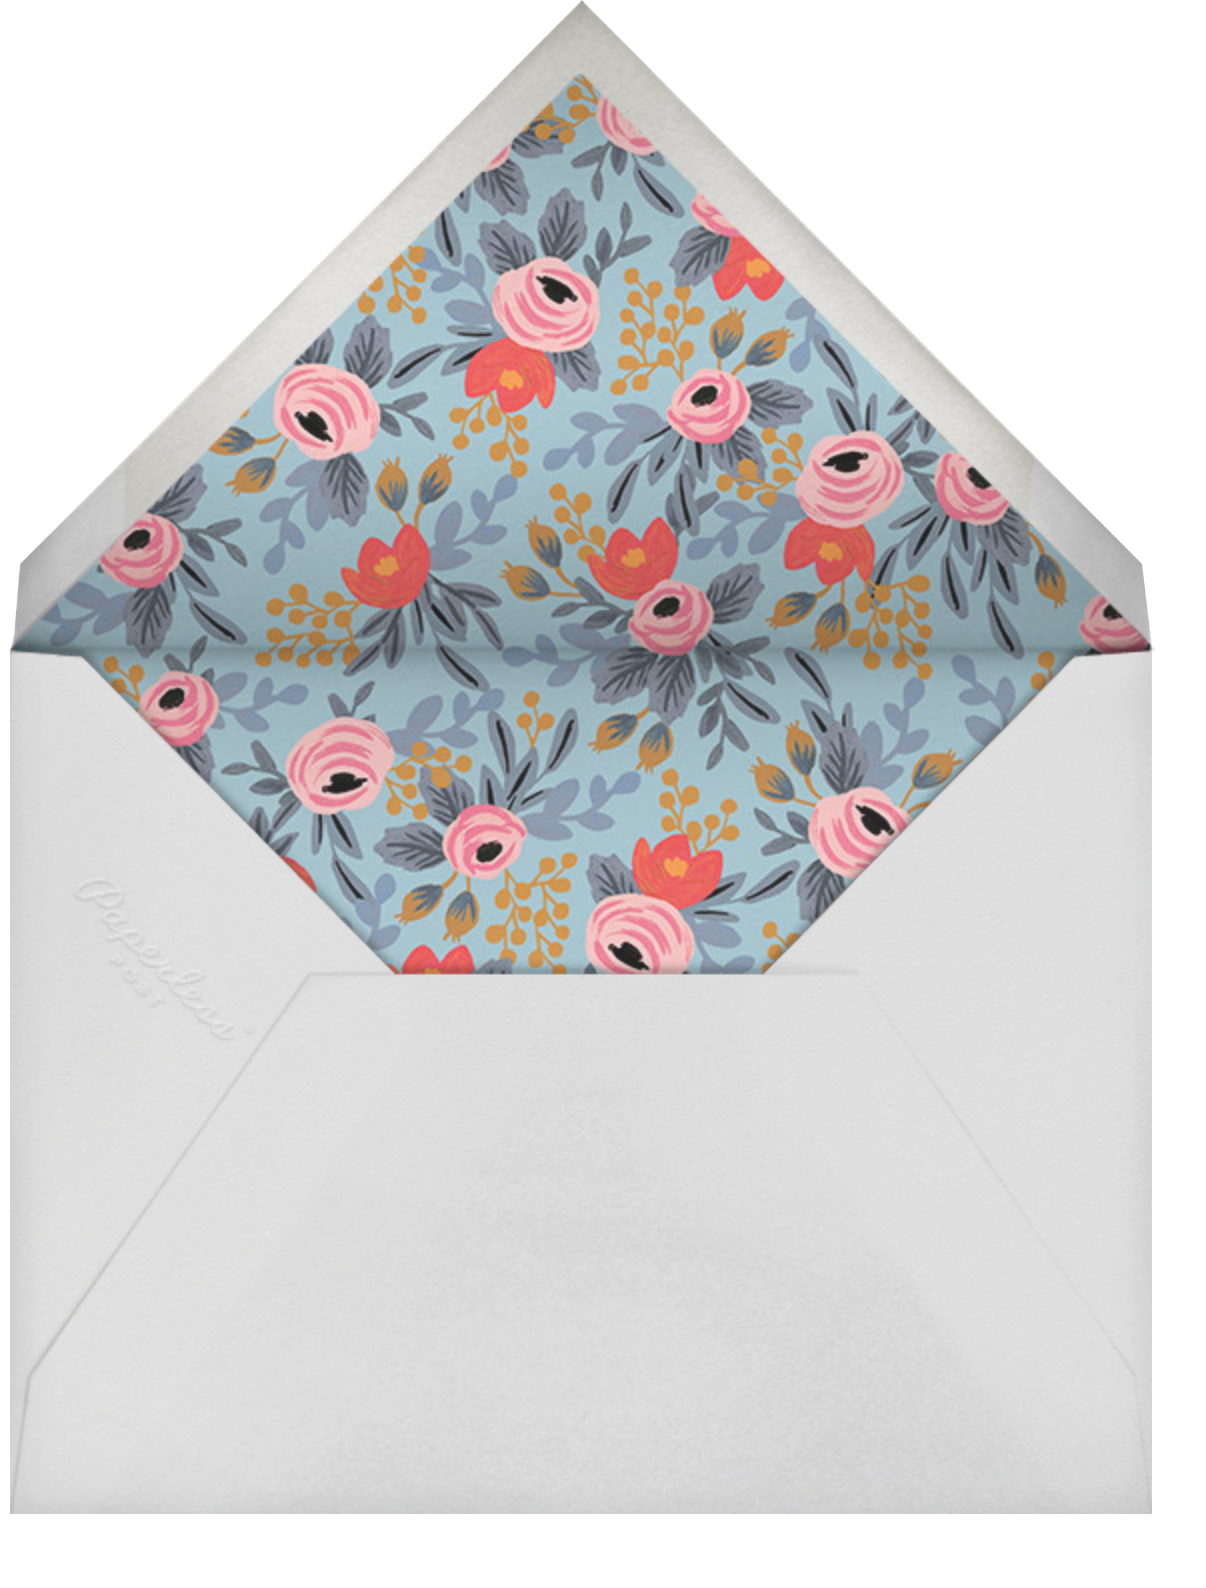 Year in Bloom - White - Rifle Paper Co. - Envelope